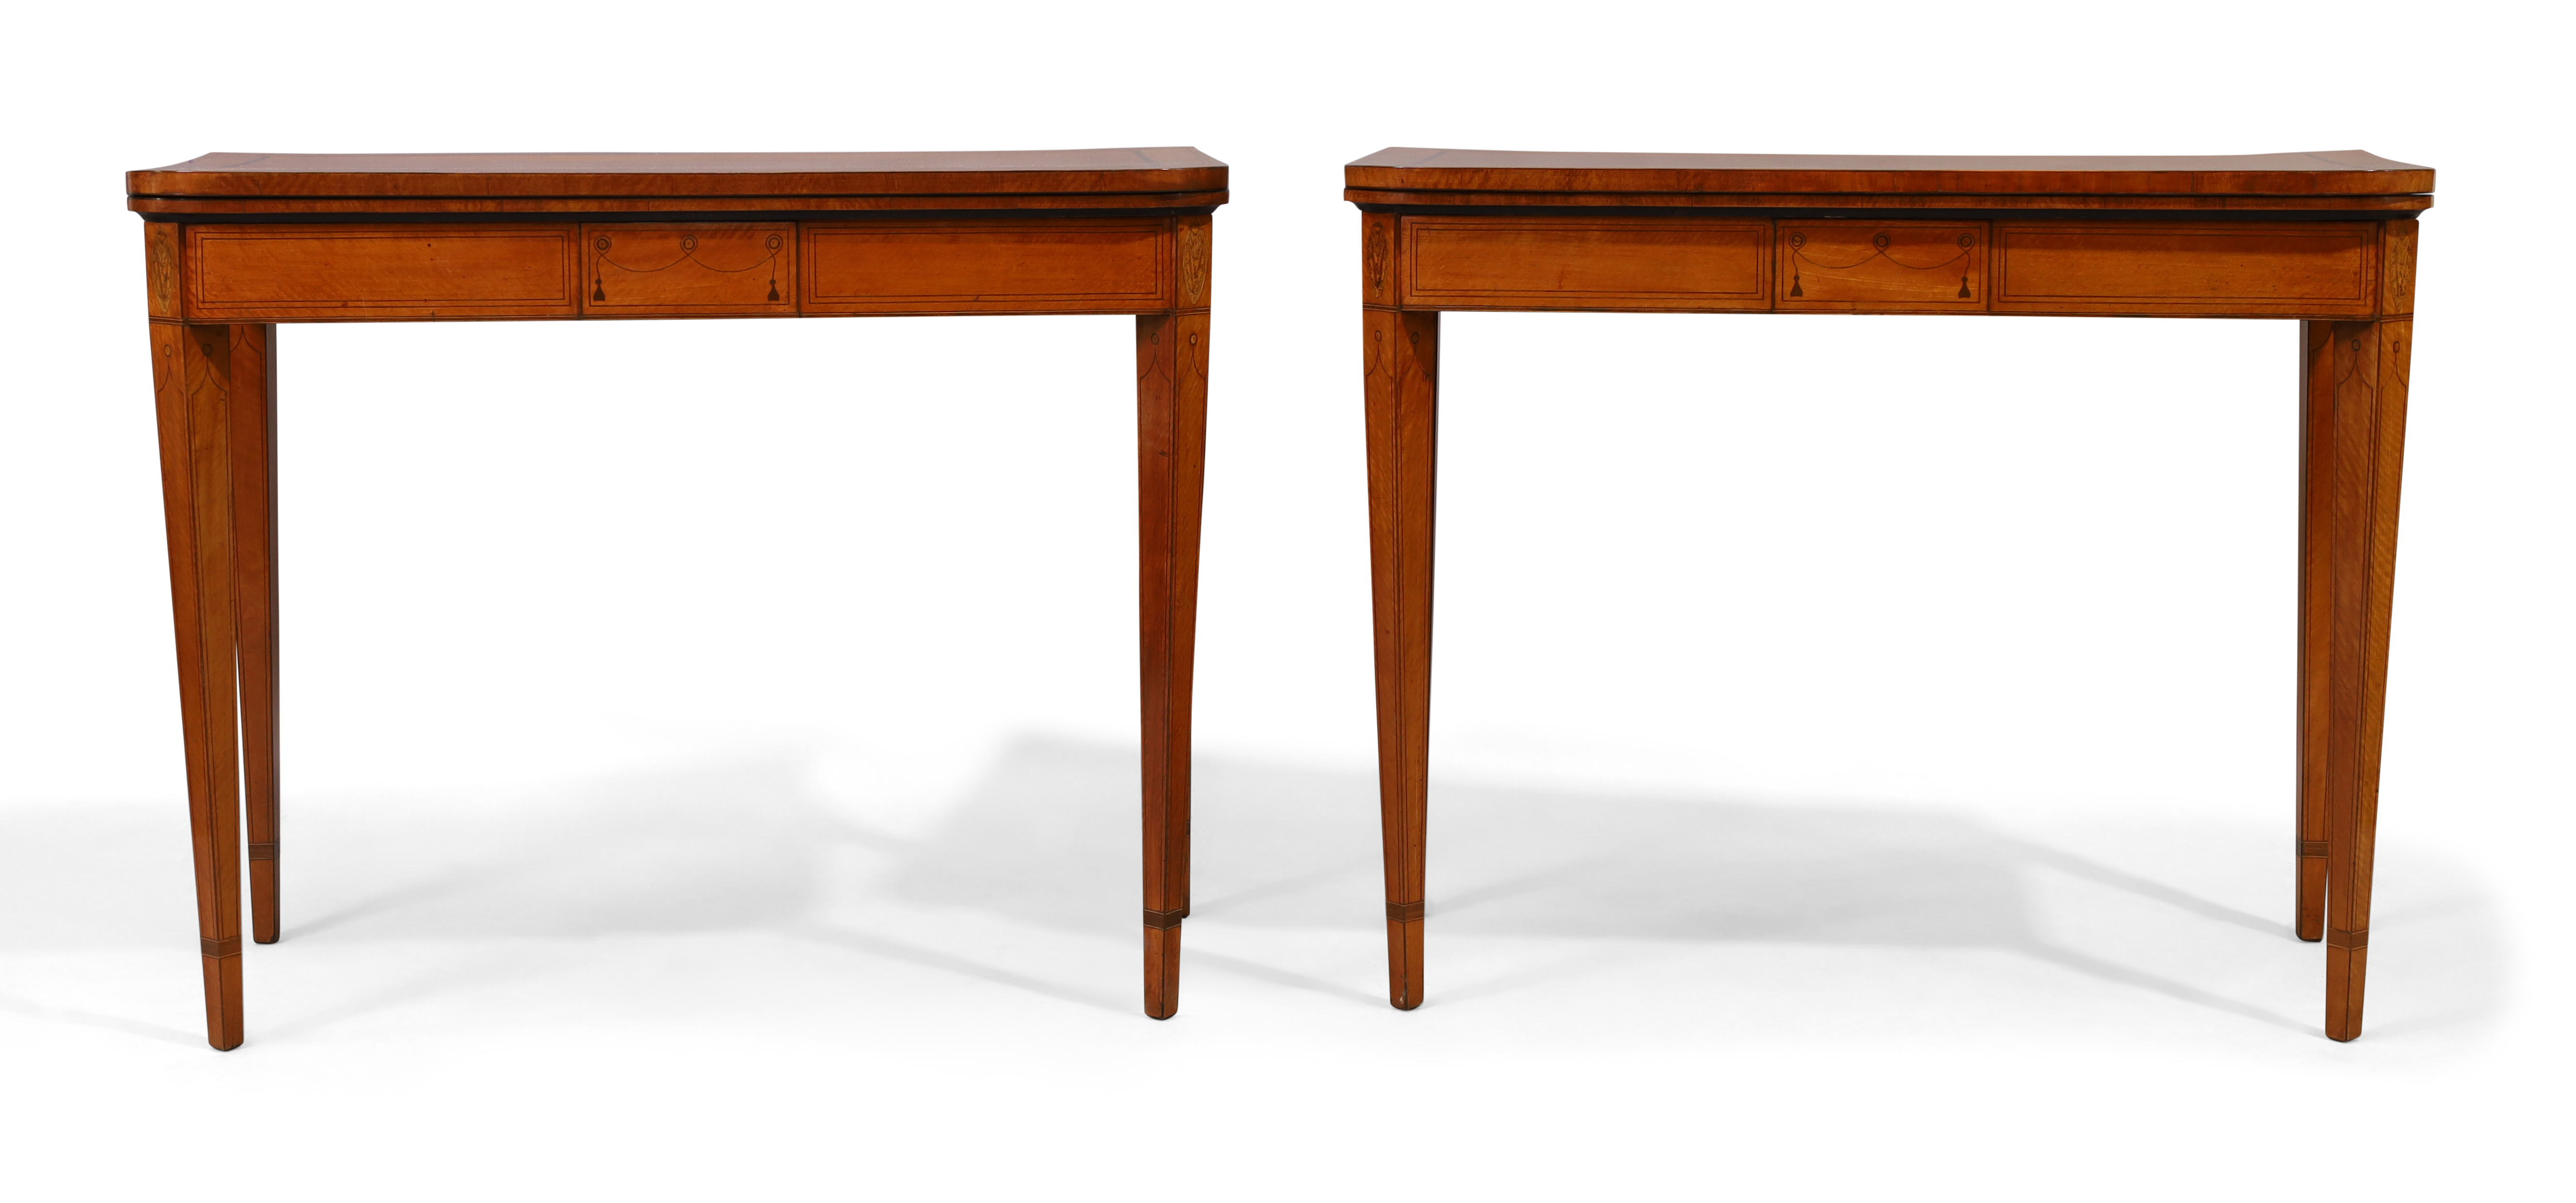 A pair of George III satinwood and inlaid gateleg card tables